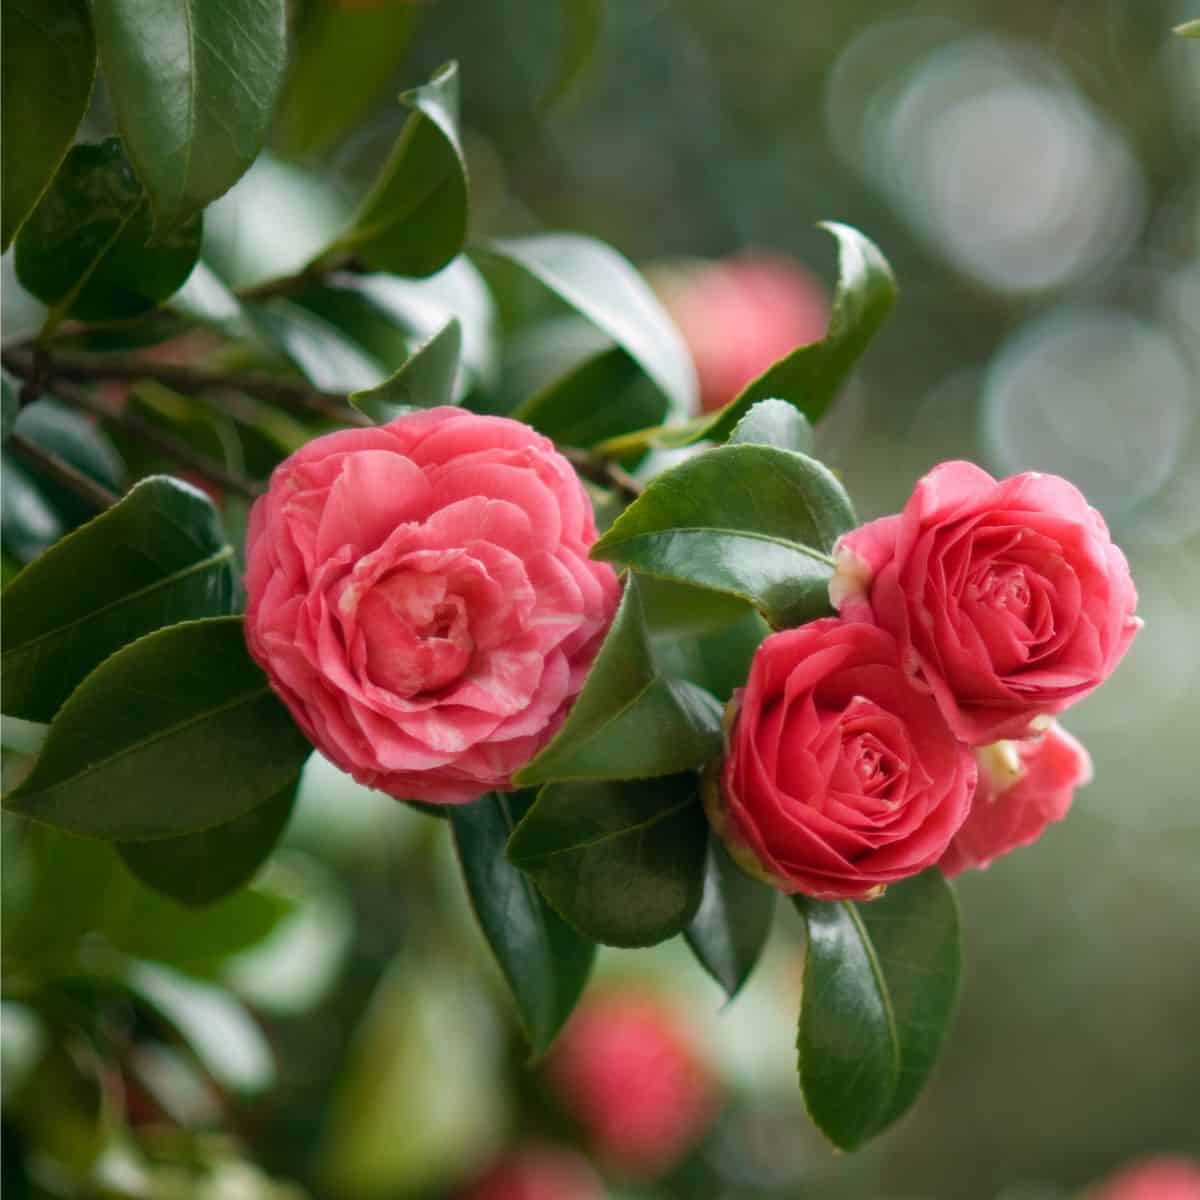 A camellia tree with pink flowers and green leaves.